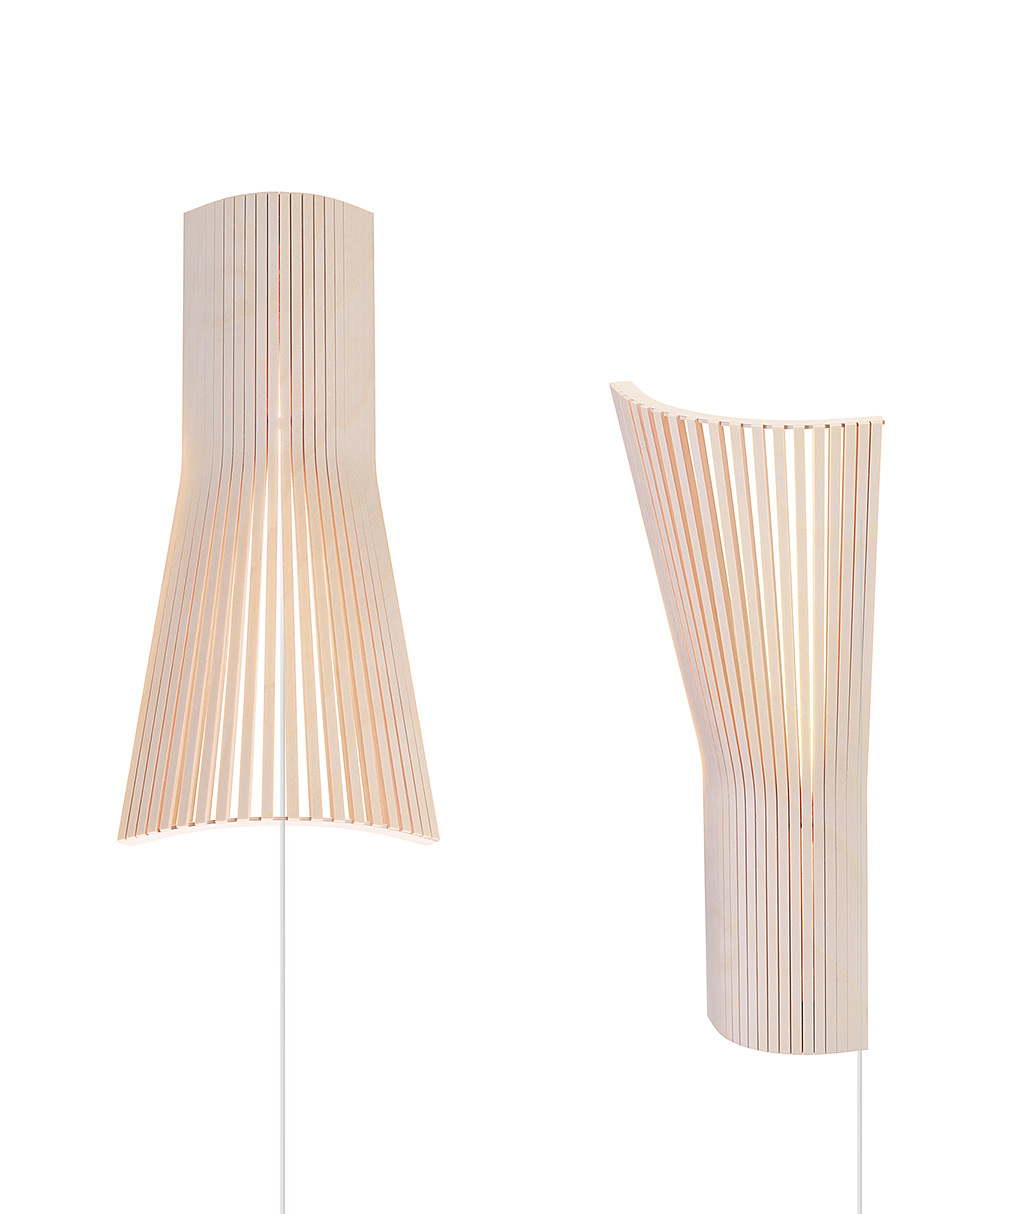 Secto Small 4237 corner lamp is available in natural birch